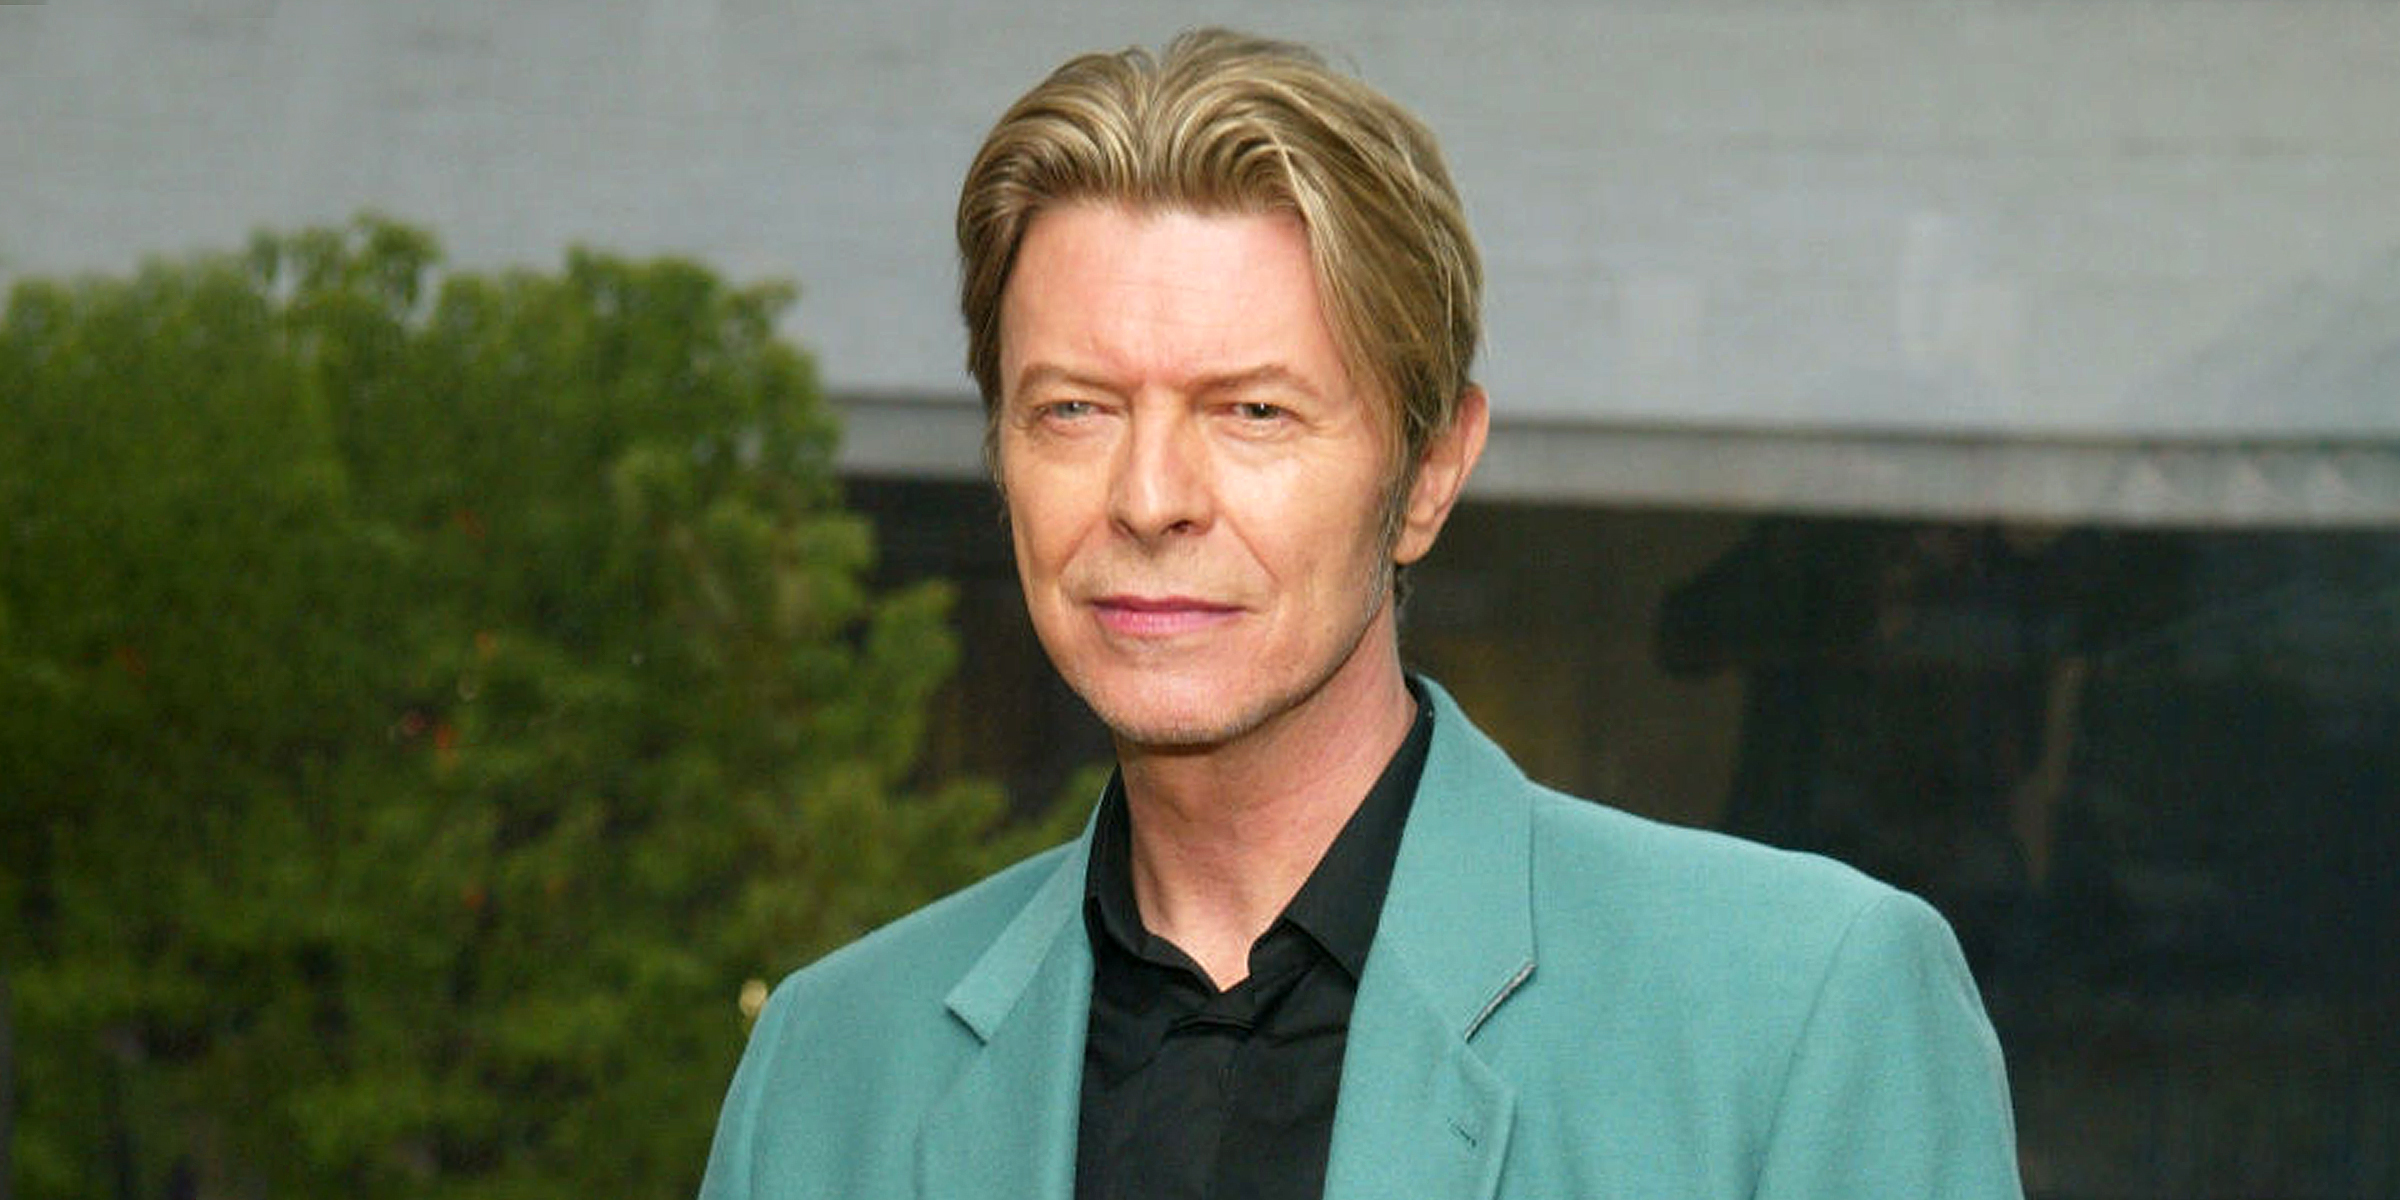 David Bowie | Source: Getty Images